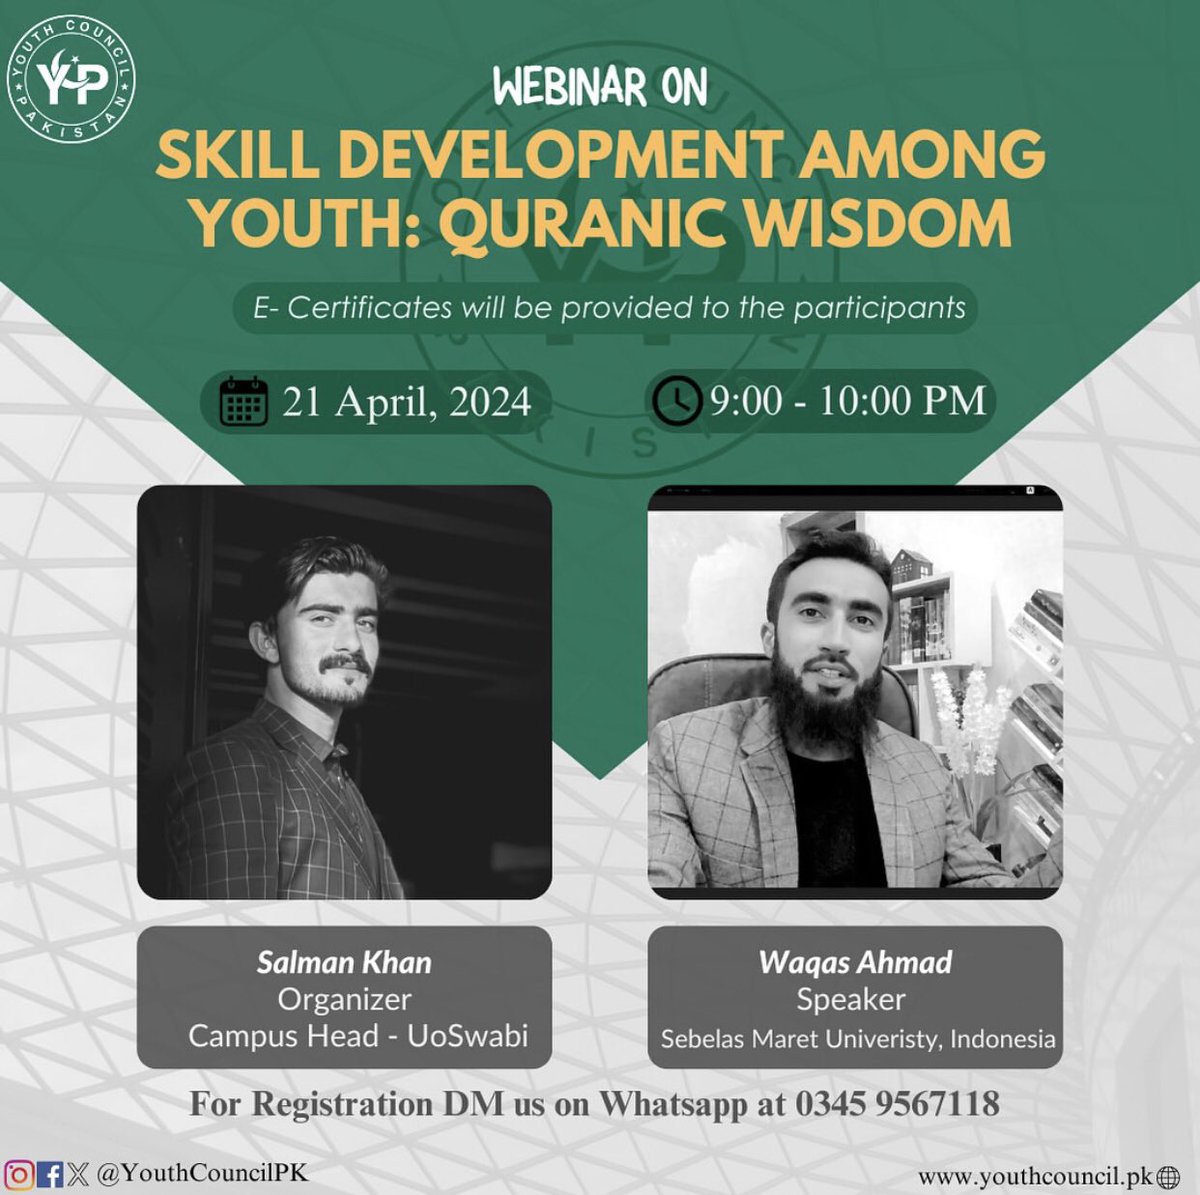 Webinar on:

*'Skill Development Among Youth: Quranic Wisdom'*

Embark on a transformative journey to uncover Quranic wisdom and hone vital skills tailored to today's youth.
Applause to the efforts of @YouthCouncilPK